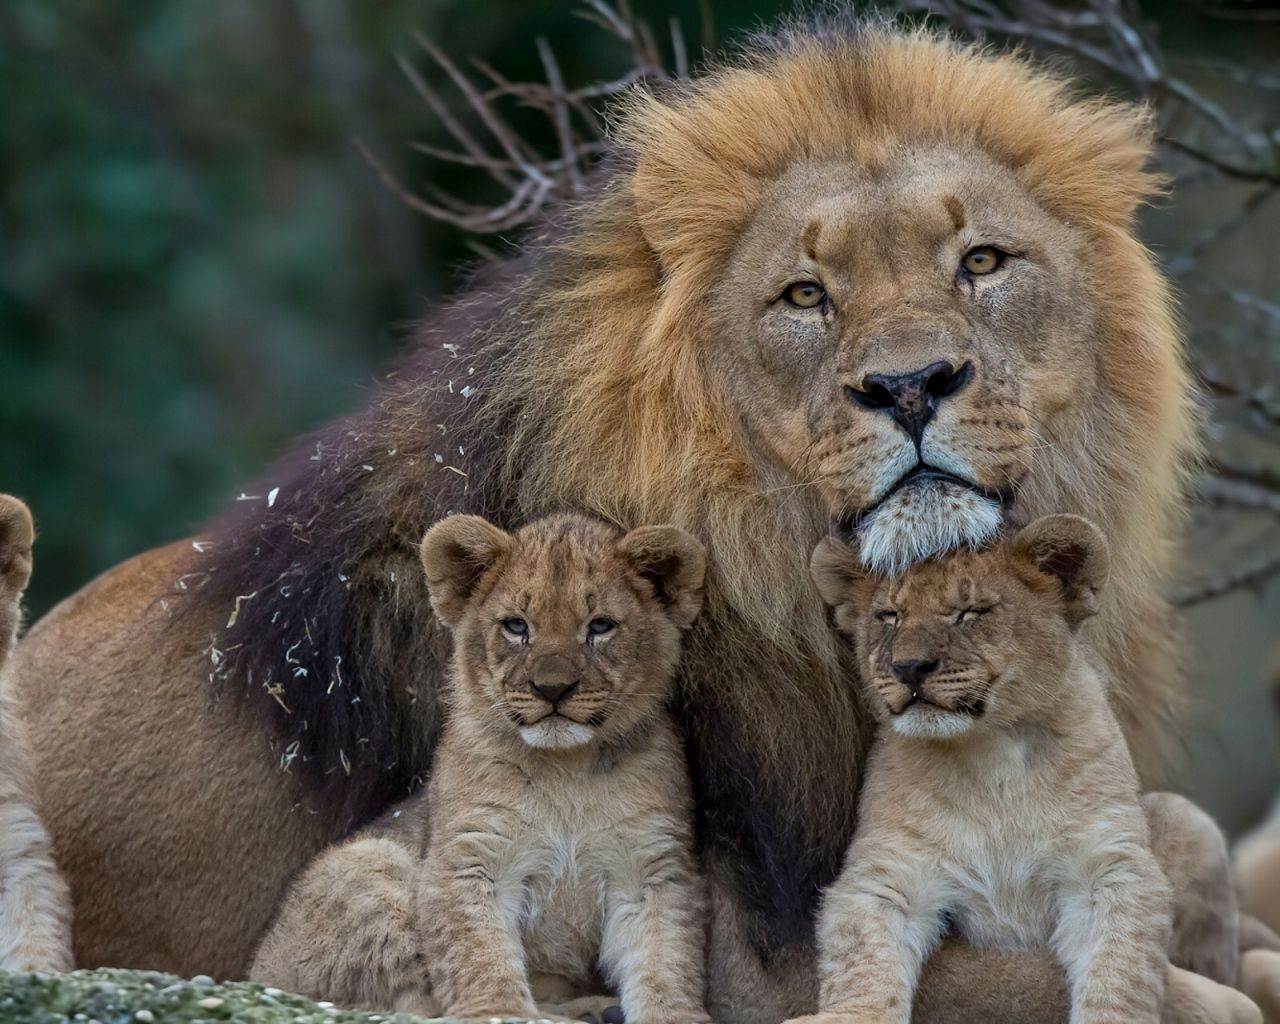 Download Wallpaper 1280x1024 Lion, Lioness, Young, Family, Predators 1280x1024 HD Background. Lion family, Cute animal picture, Cute animals